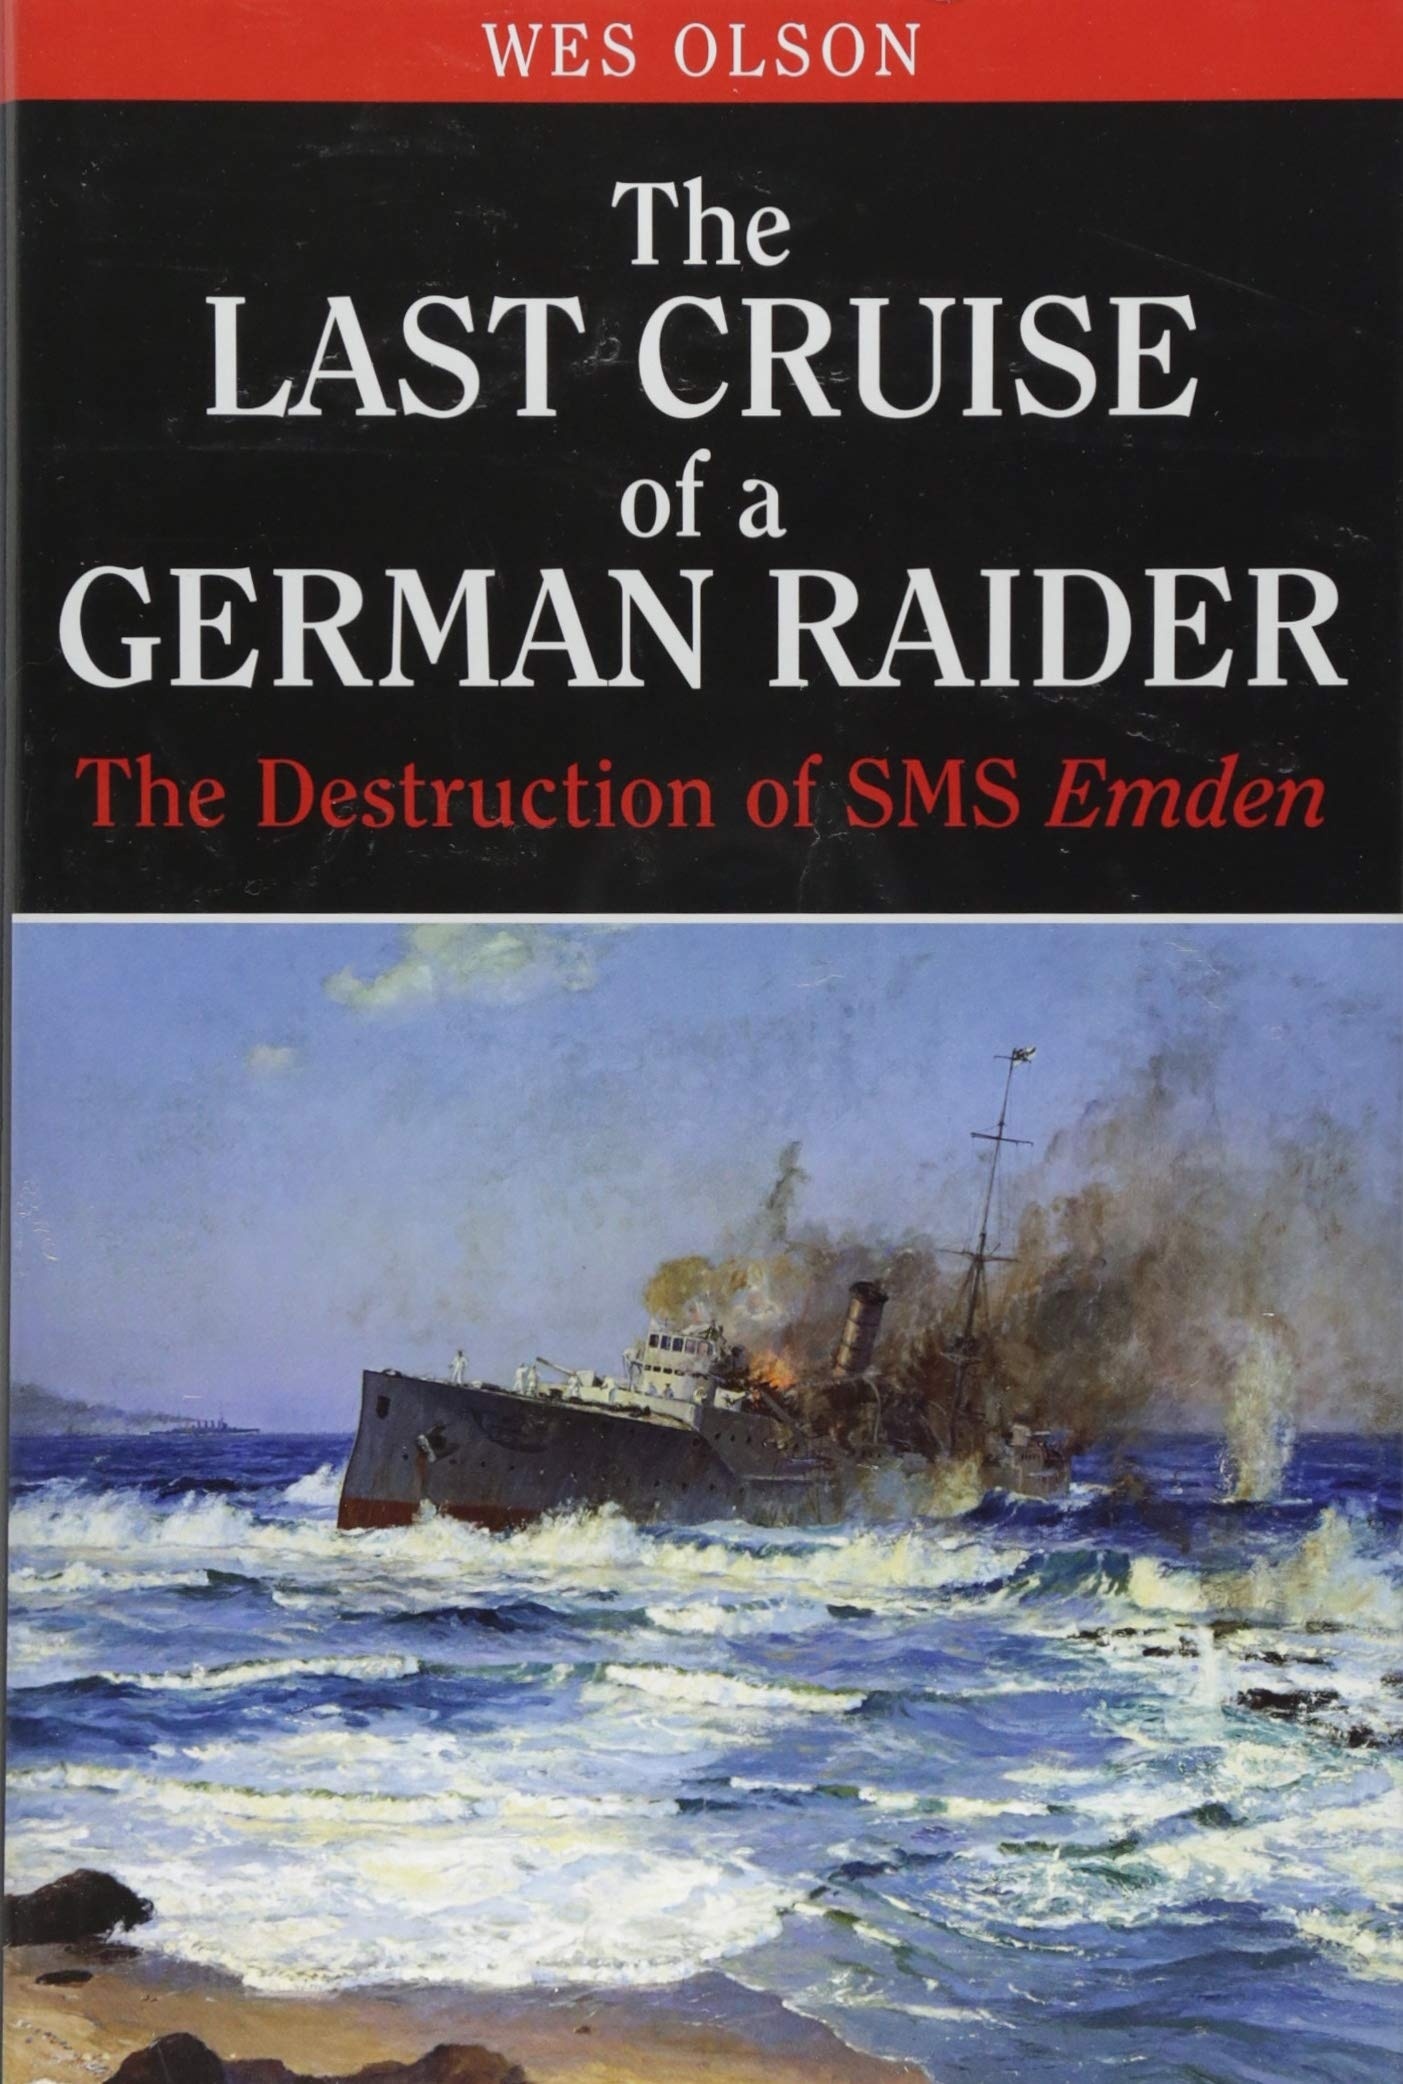 The Last Cruise of a German Raider "The Destruction of SMS"